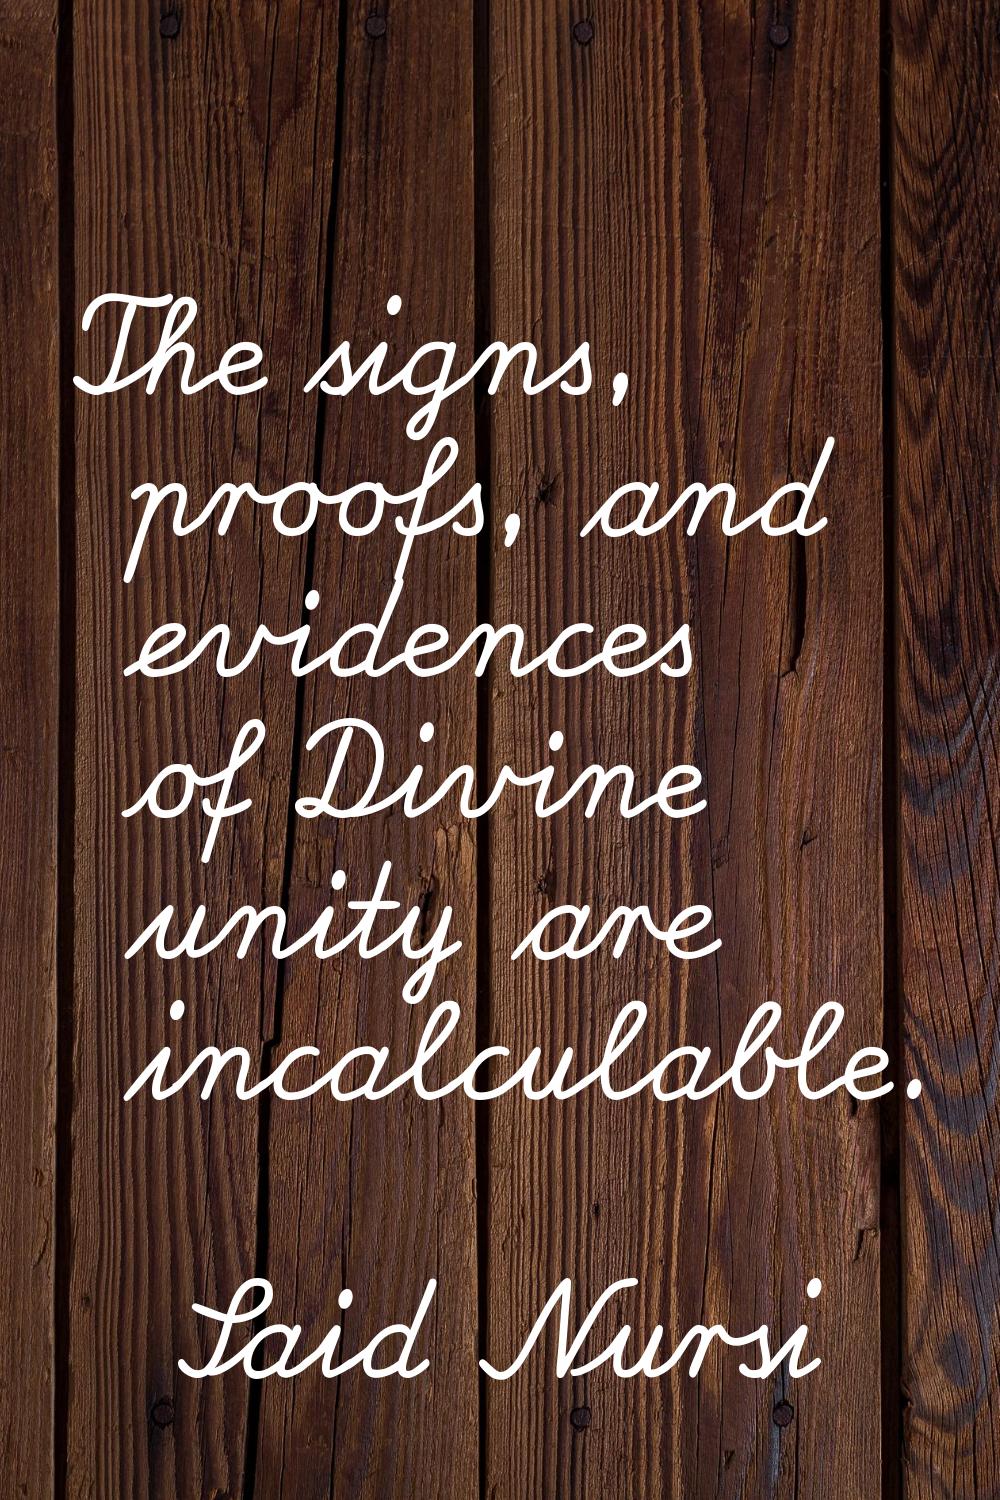 The signs, proofs, and evidences of Divine unity are incalculable.